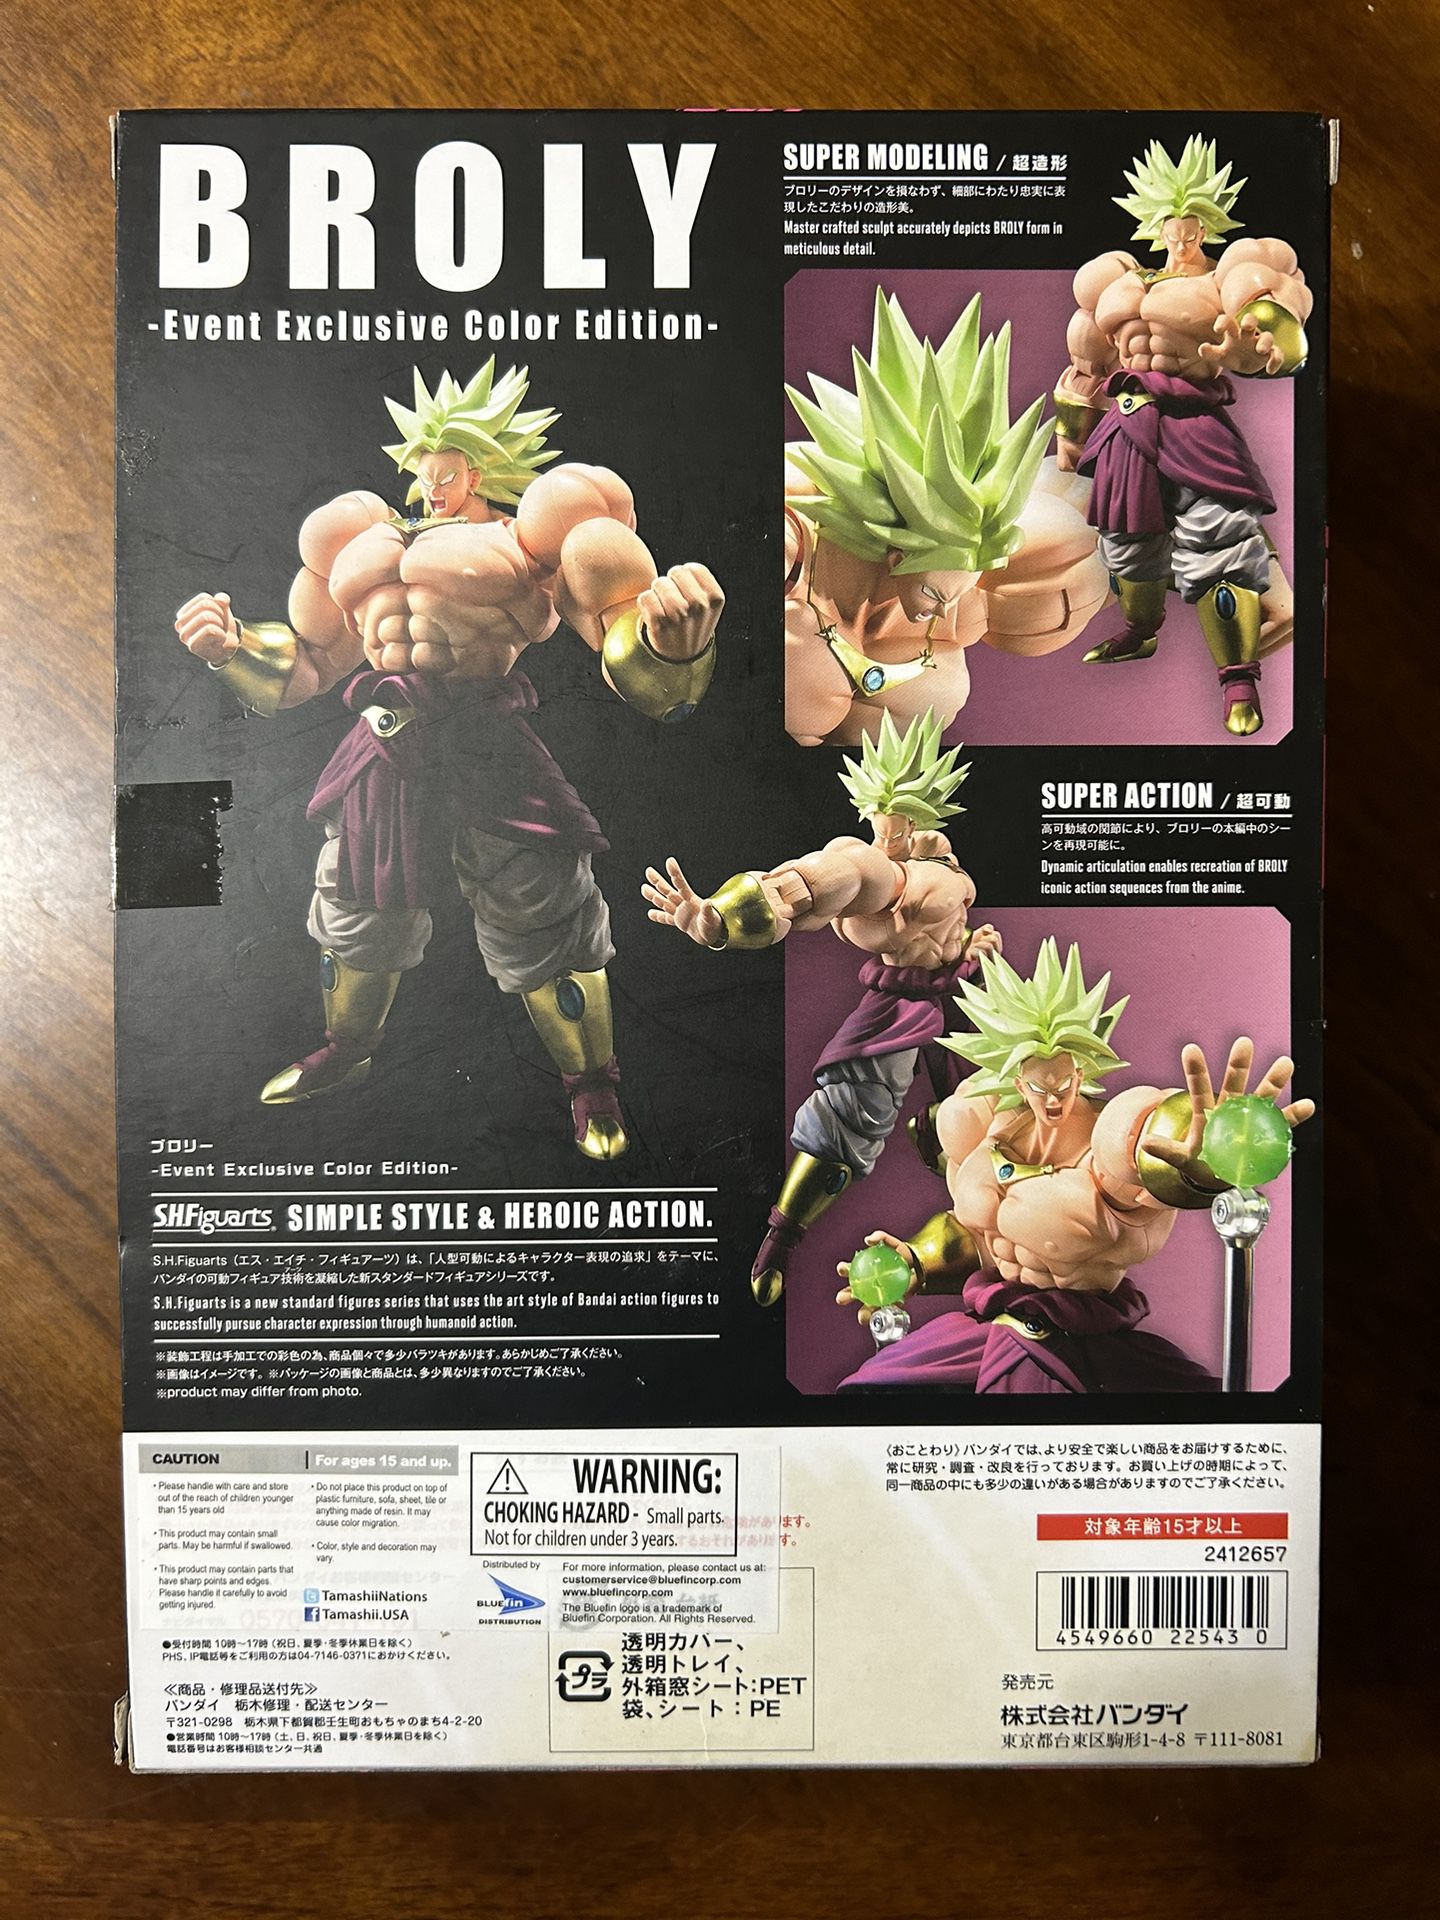 Dragon Ball Sh Figuarts Broly for Sale in San Antonio, TX - OfferUp